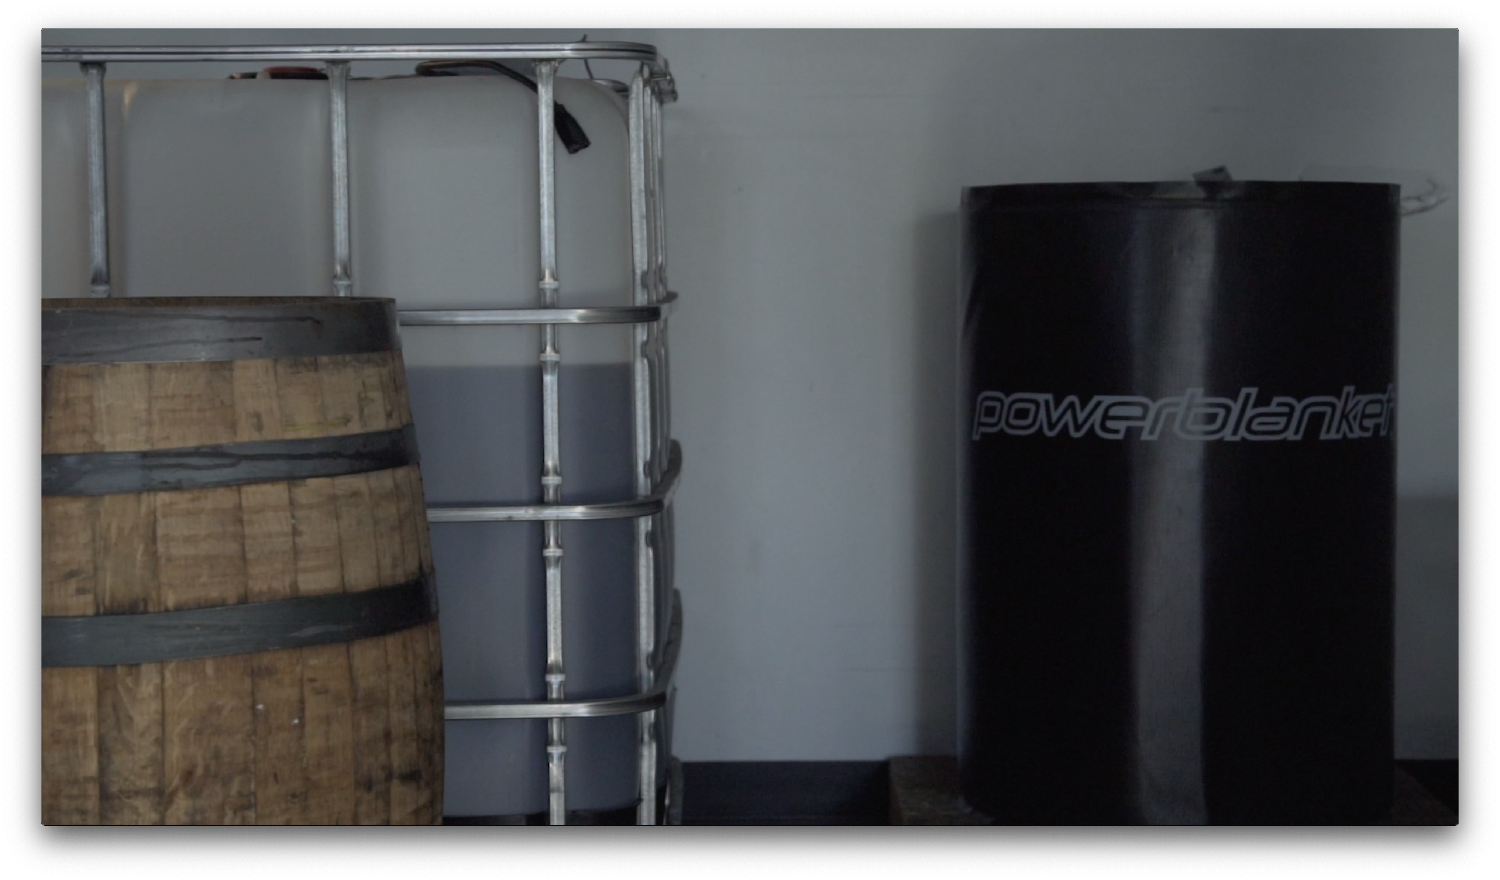 The Powerblanket drum heater in action at a local distillery